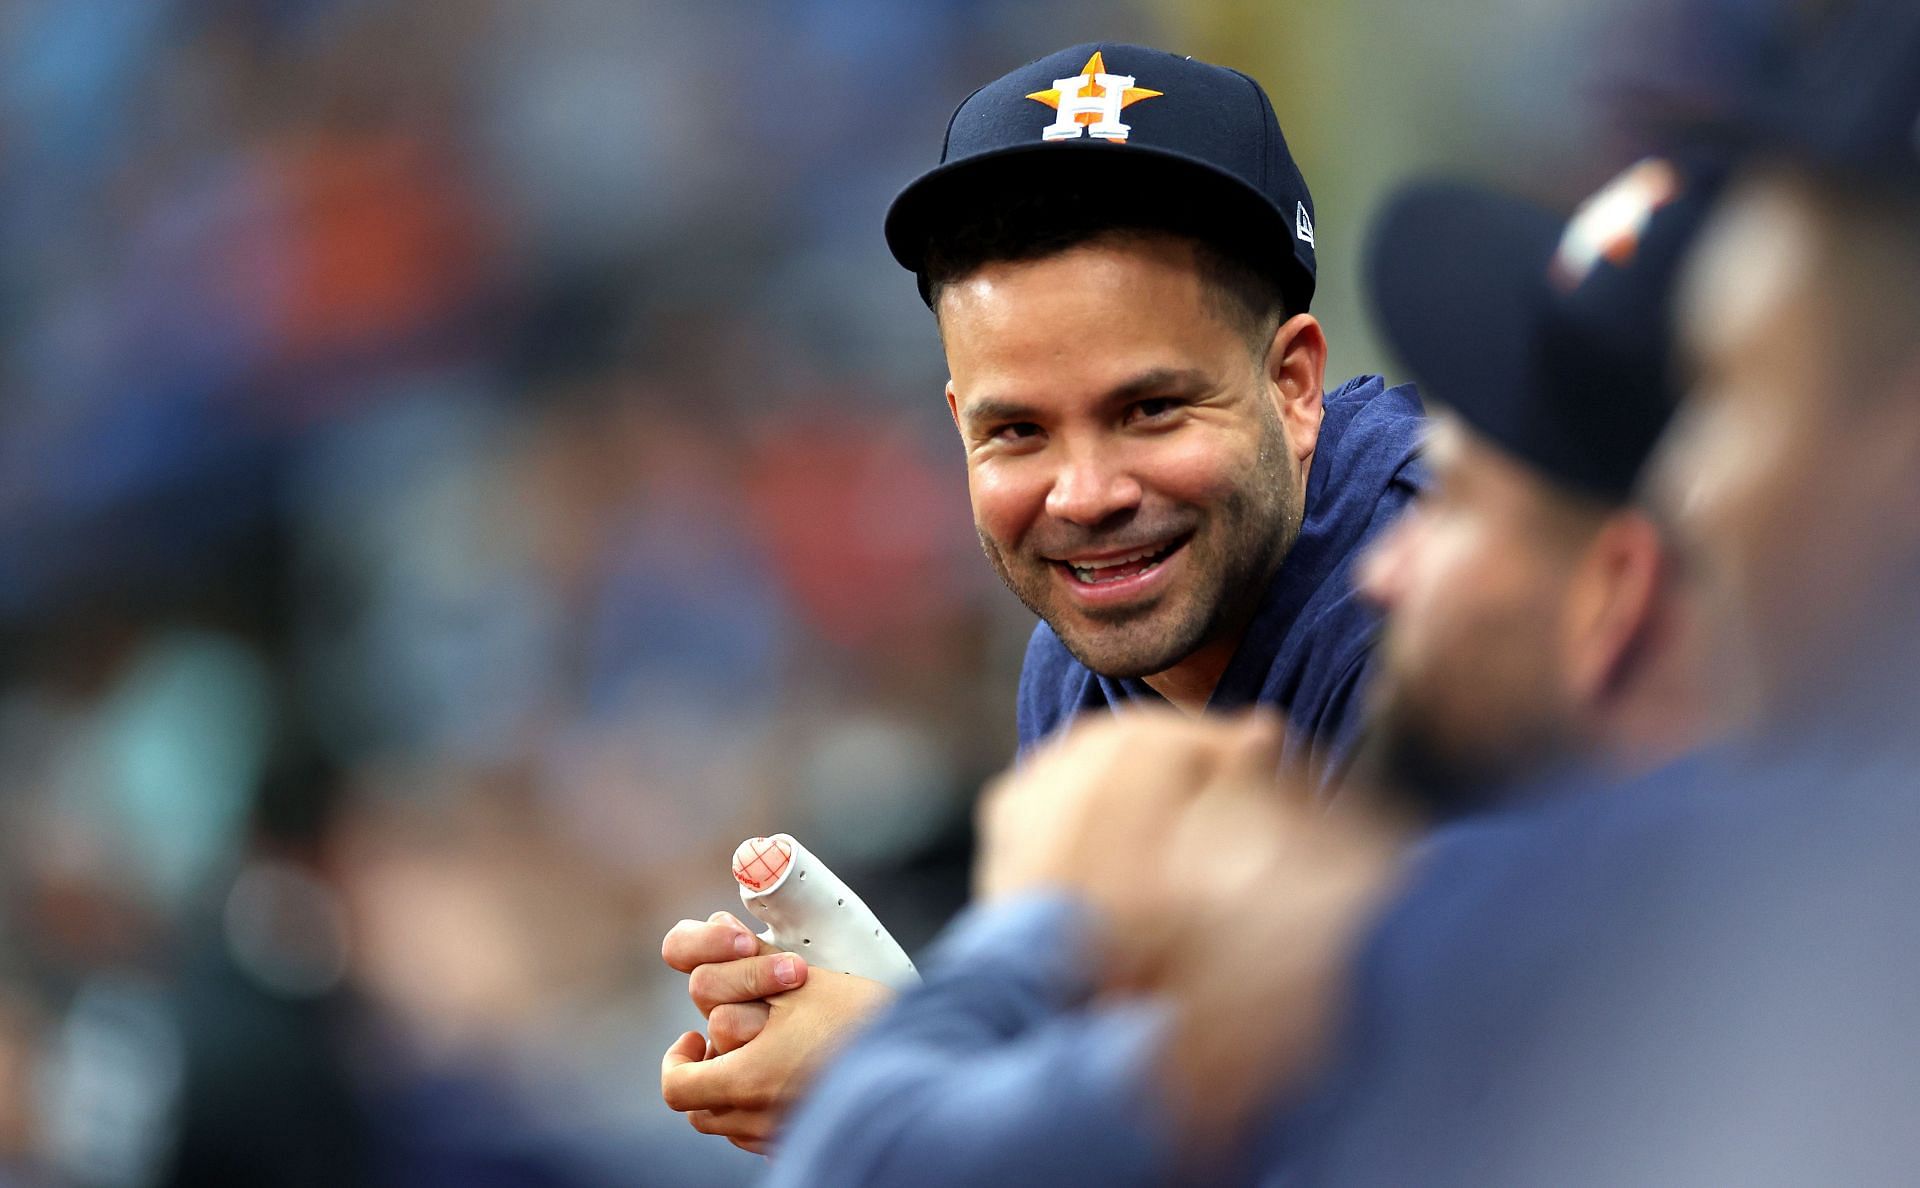 Jose Altuve of the Houston Astros looks on during a game against the Tampa Bay Rays at Tropicana Field